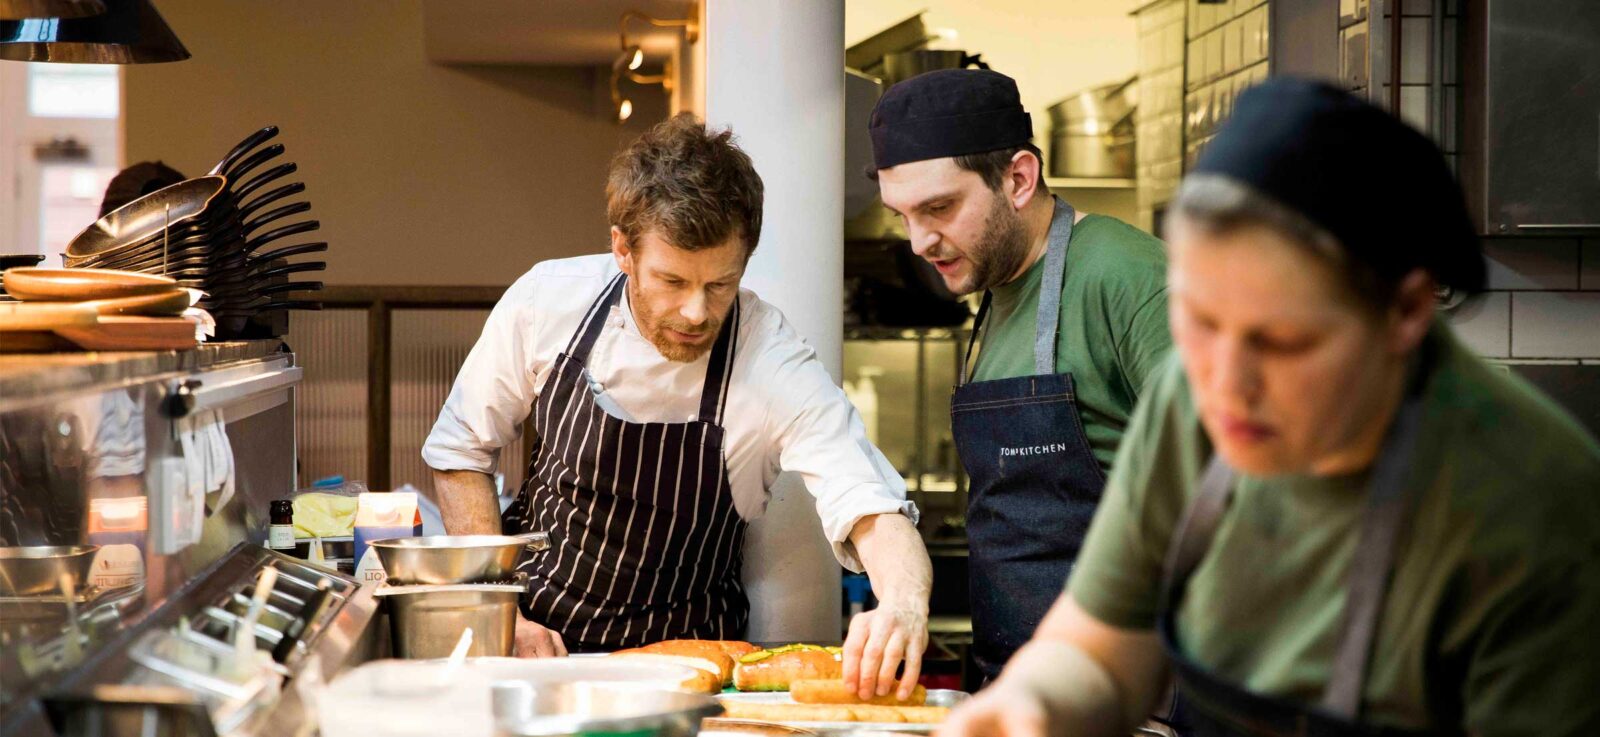 Tom Aikens Feature 6 - A Culinary Adventure hosted by Tom Aikens at Alladale Wilderness Reserve in Scotland